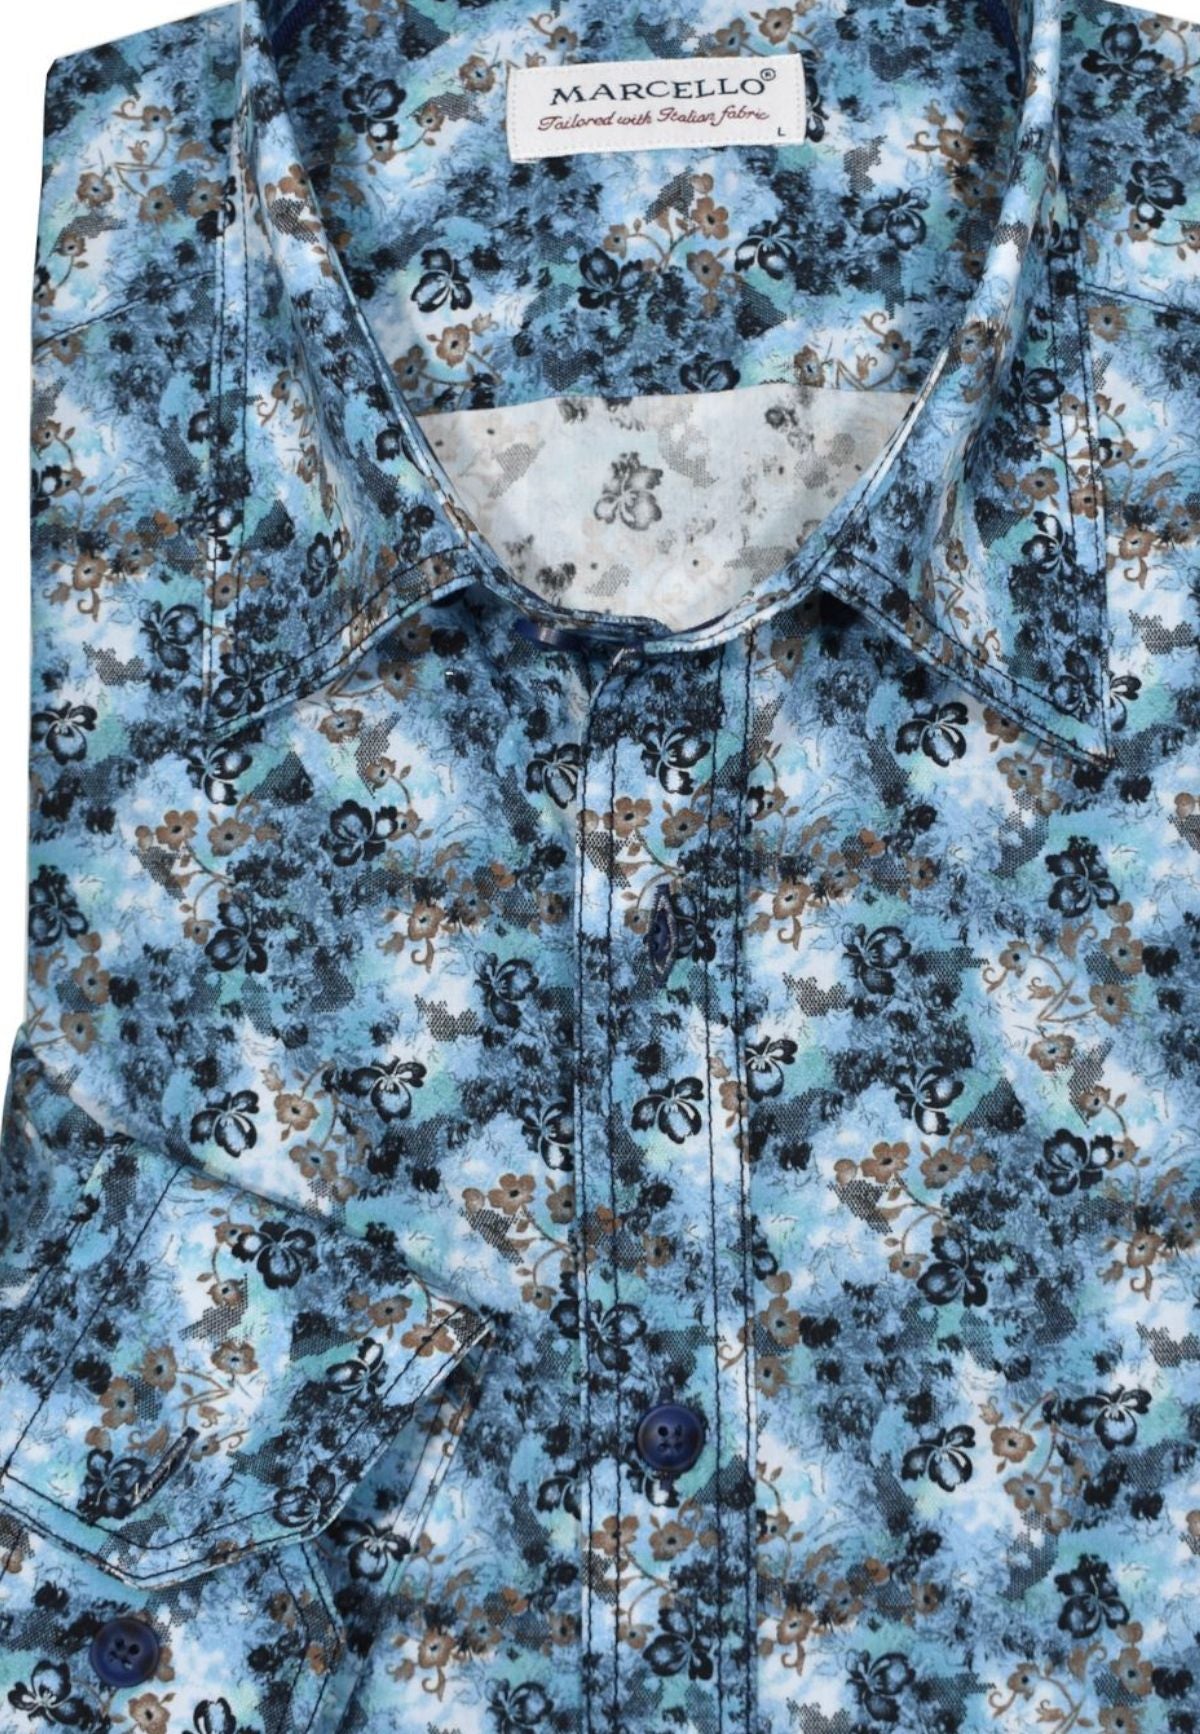 You'll be transfixed by the beauty of this abstract print shirt. Rich ocean tropical colors with an accent mocha floral and contrast double track stitch detailing create an unforgettable look. Plus, the matched buttons and contrast neck tape complete the look. Shirt by Marcello.